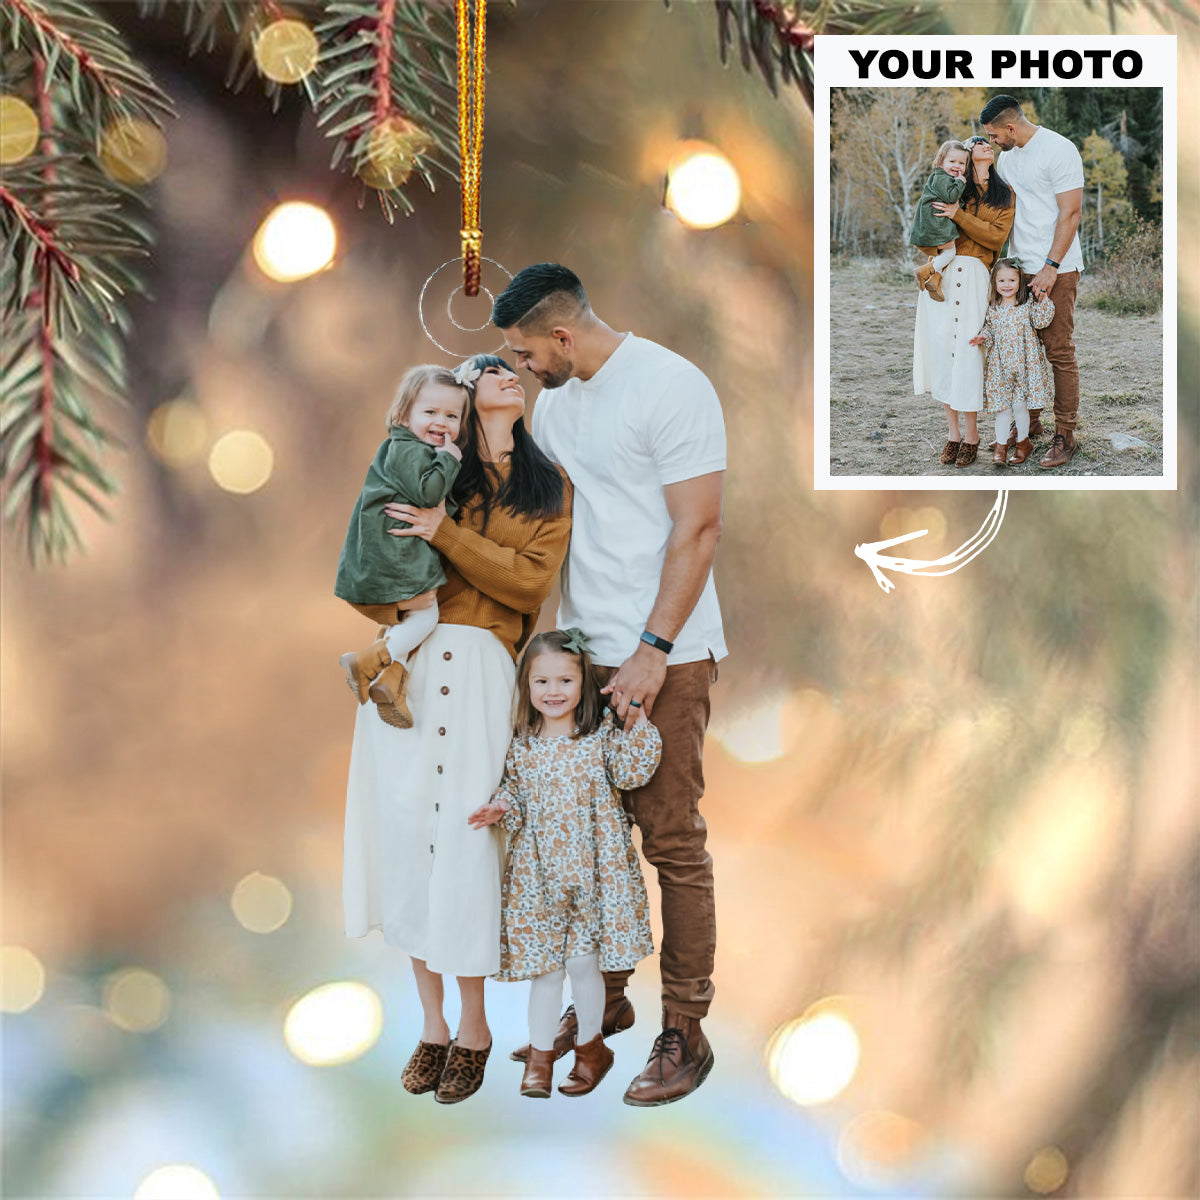 Personalized Couple/Family Member Upload Photo Christmas Ornament